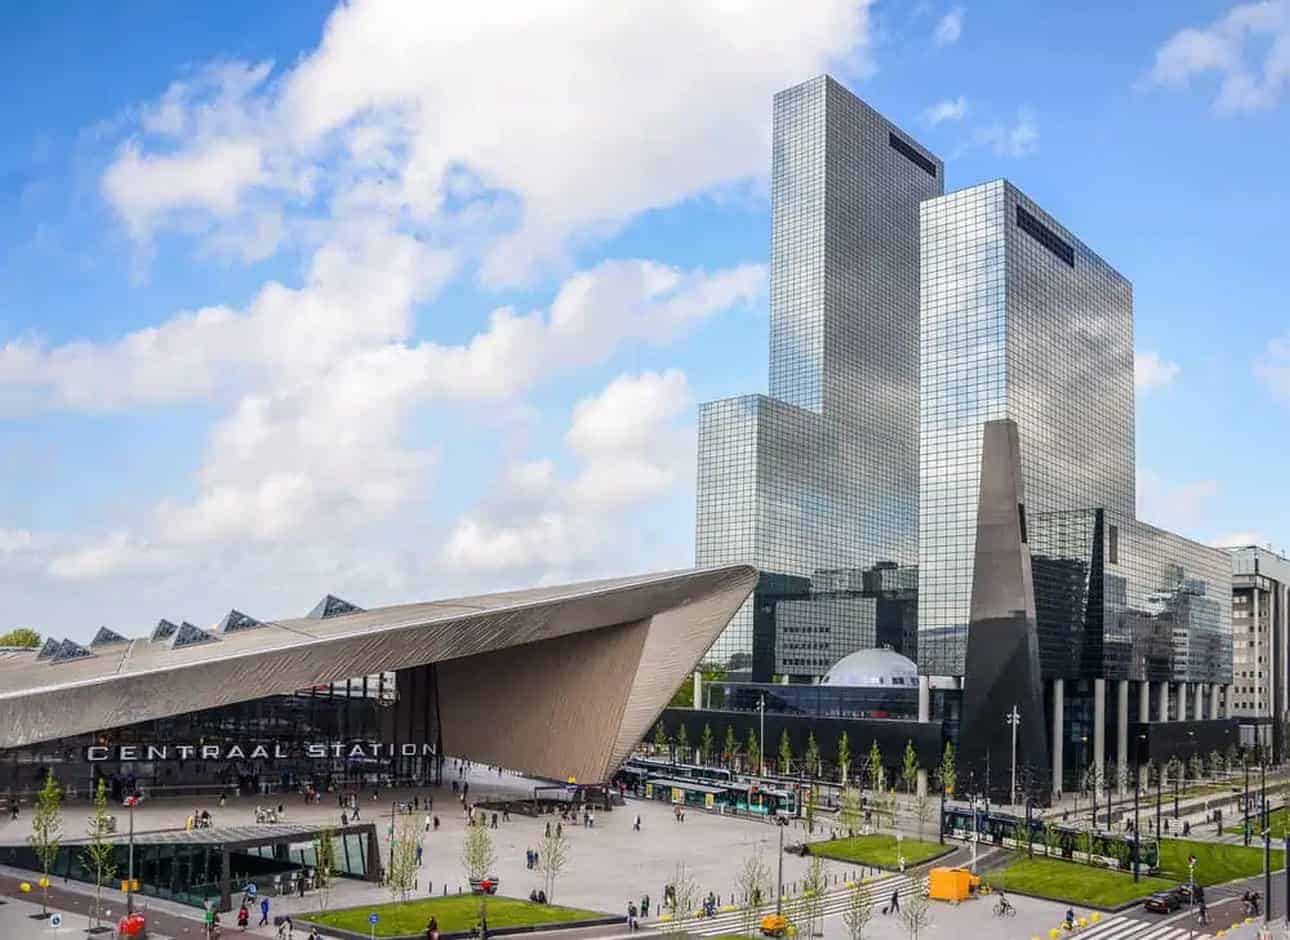 Rotterdam, Netherlands financial centre skyline, including the Central Station, which is an important transport hub with 110,000 passengers per day